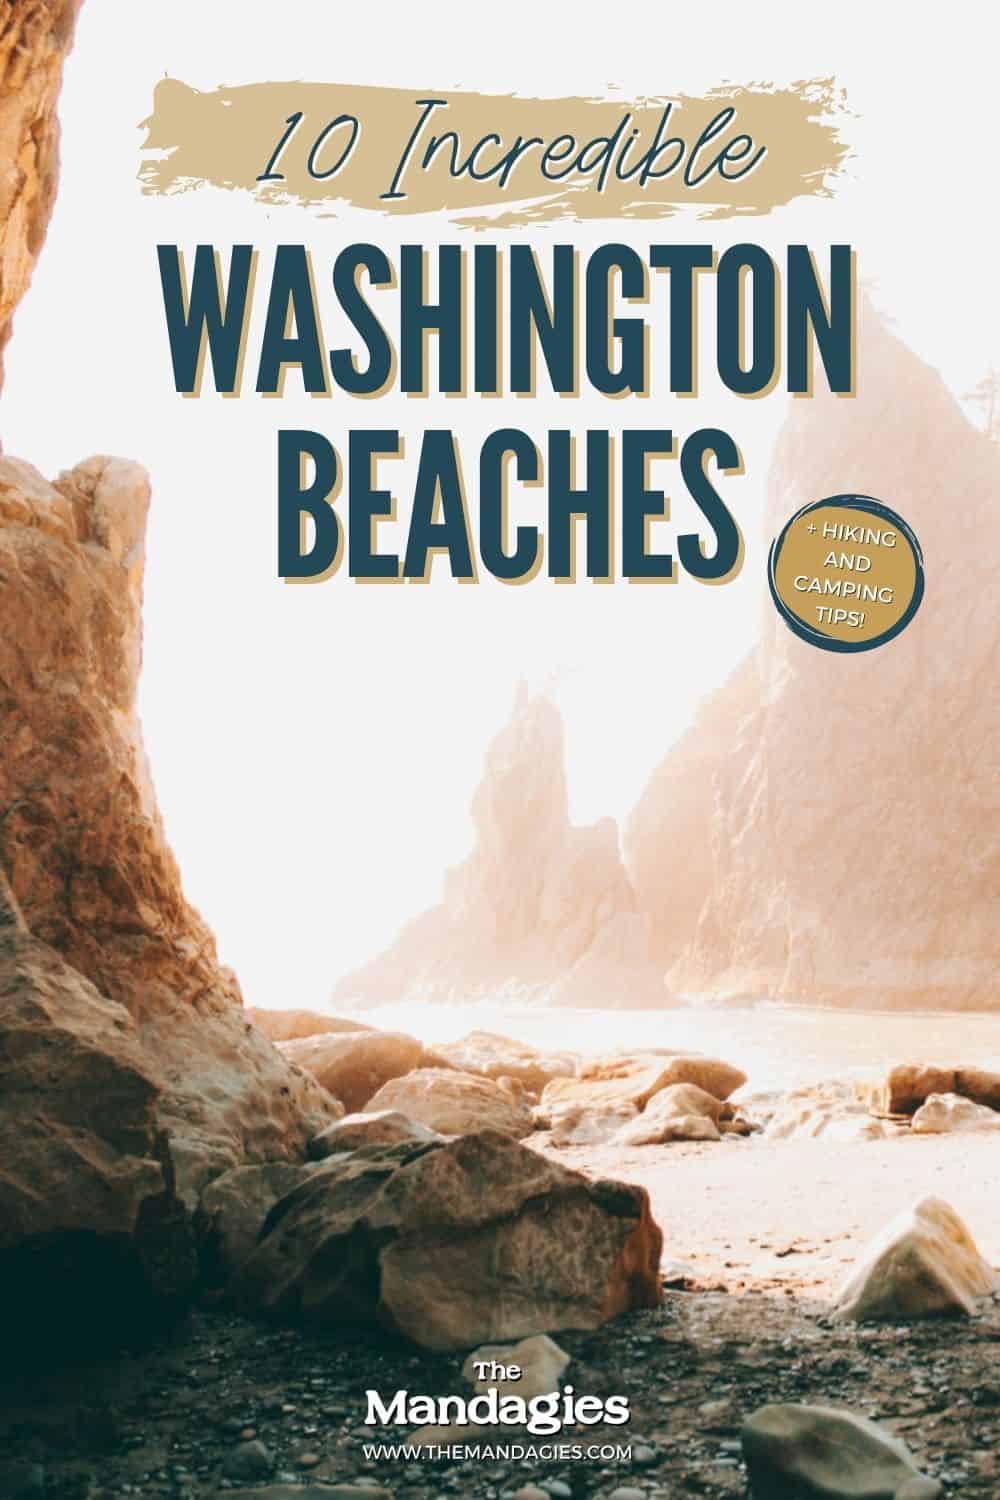 Looking for the best beaches in Washington state? We're coving the best Washington Beaches, including Cape Flattery, Ruby Beach, Rialto Beach, Kalaloch Beach and so many more in the Olympic National Park! #beach #washington #washingtonstate #olympicpeninsula #olympicnationalpark #PNW #pacificnorthwest